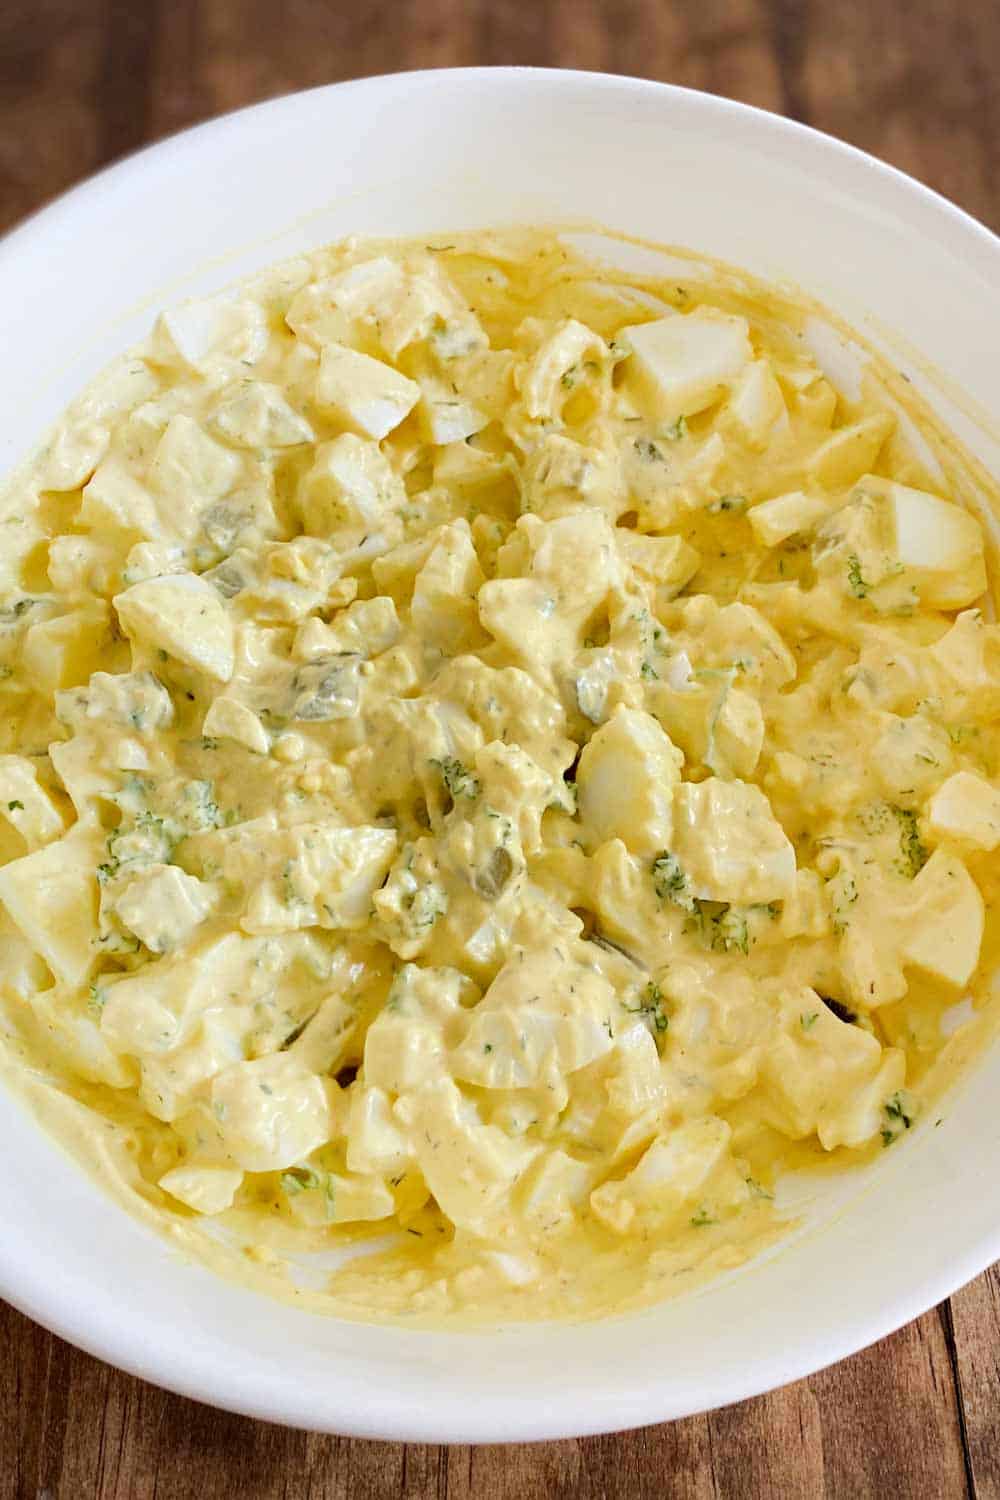 Dill Pickle Egg Salad in Serving Bowl